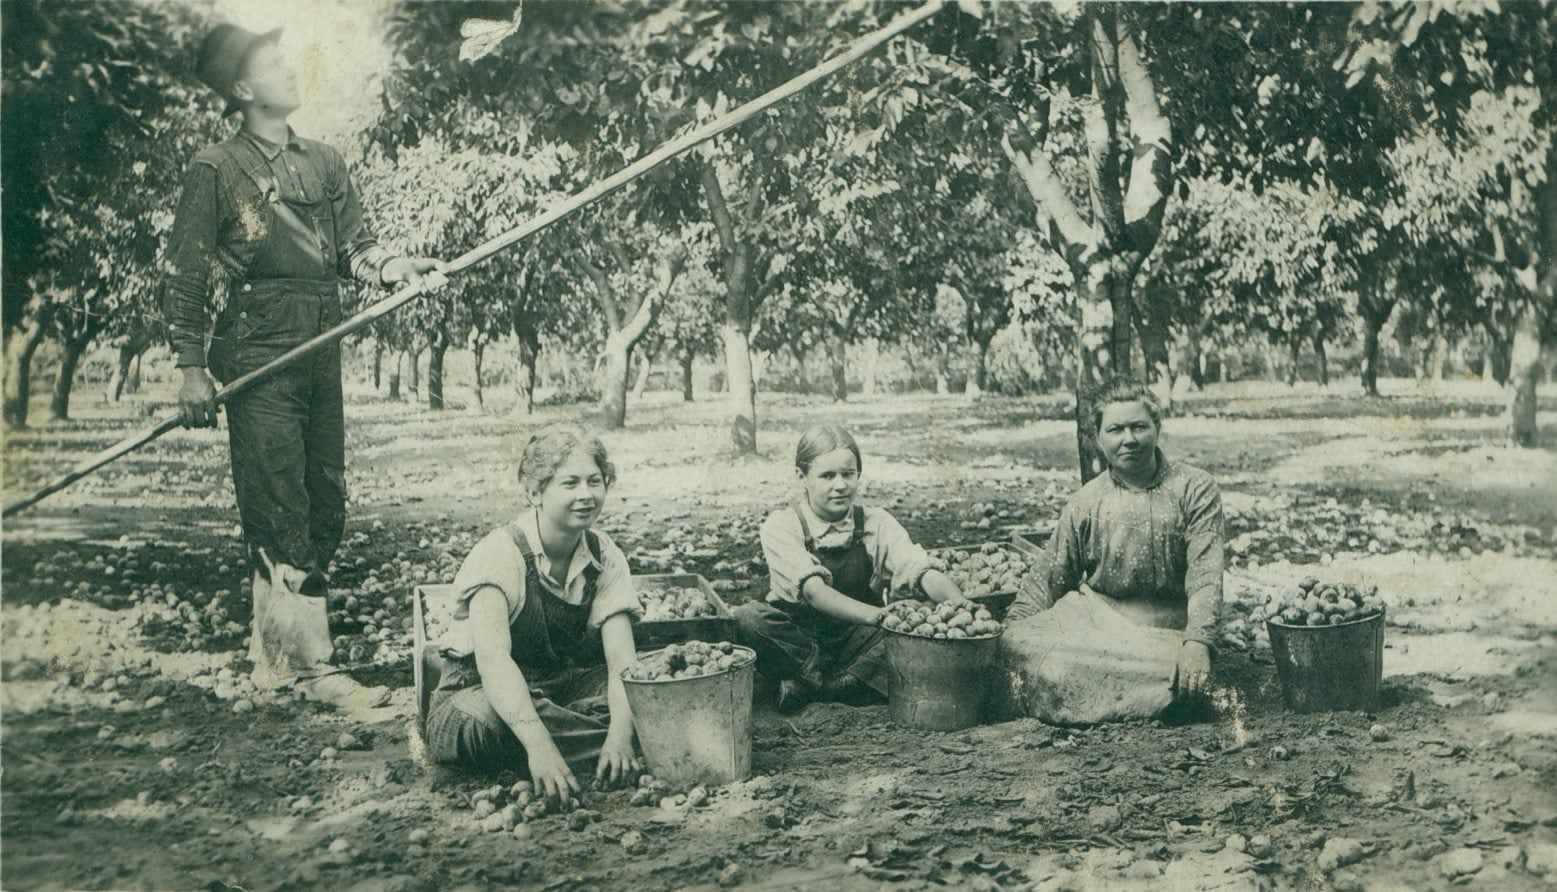 Prune workers toil at a Vancouver farm in this undated photo. From left are Grant Anderson, (unknown) Anderson, unknown, Mrs. Anderson.